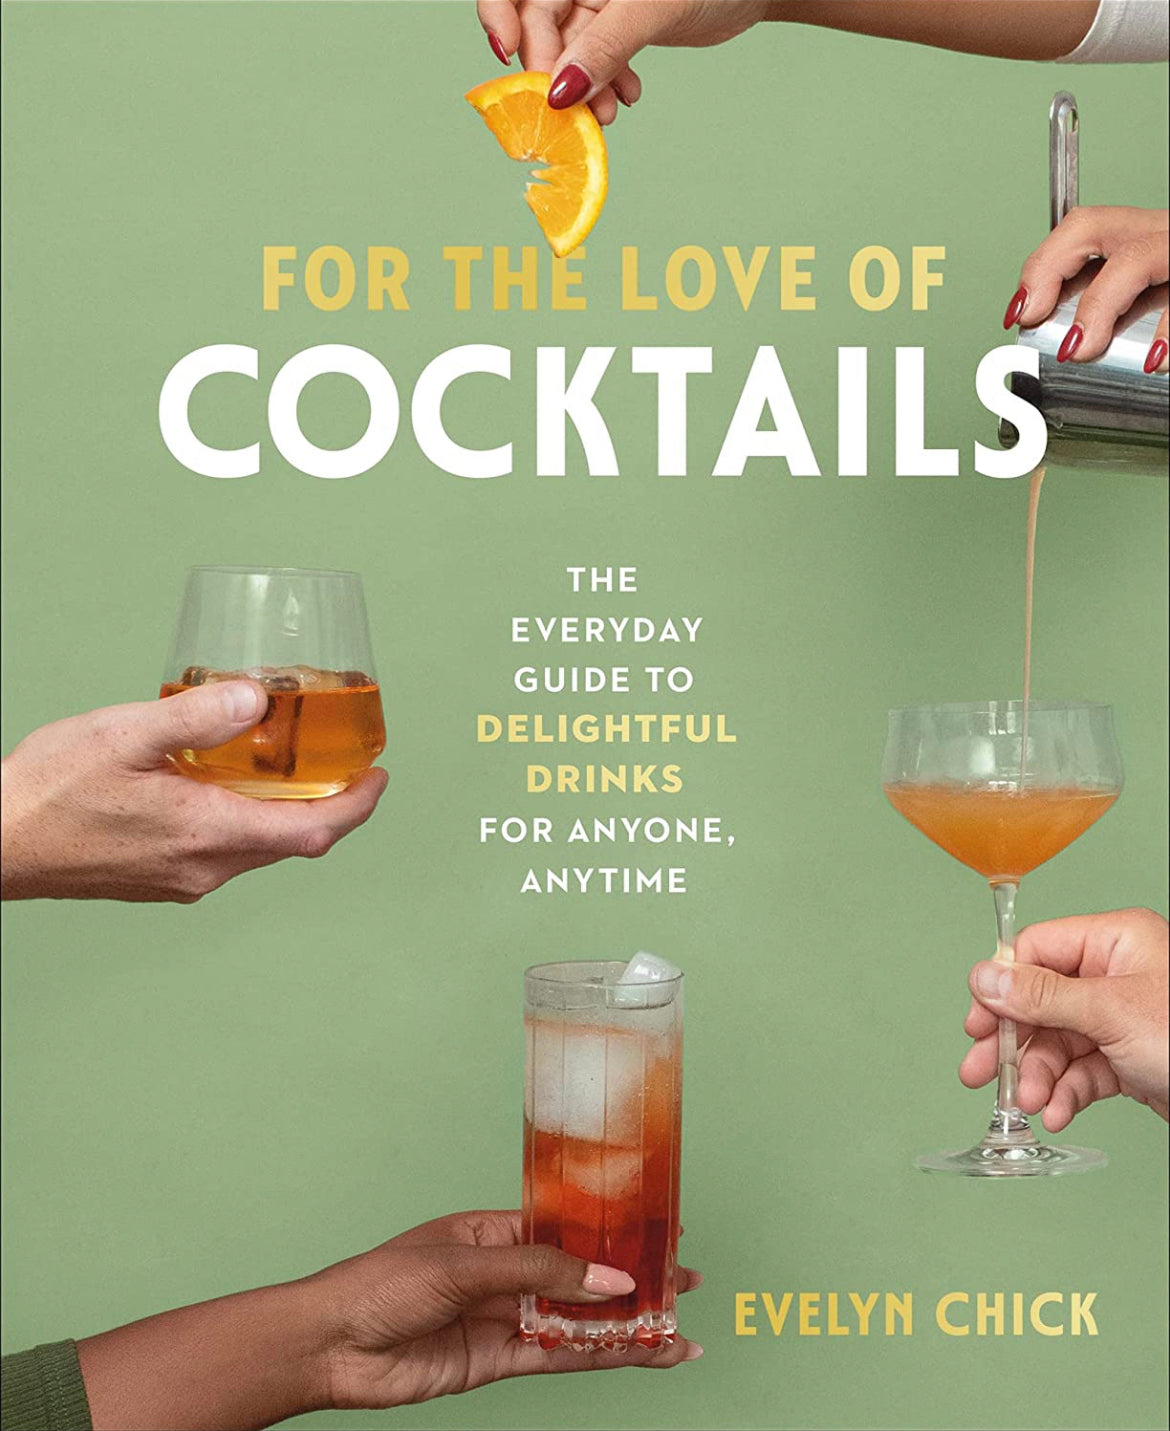 For The Love of Cocktails: The Everyday Guide to Delightful Drinks for Anyone, Anytime